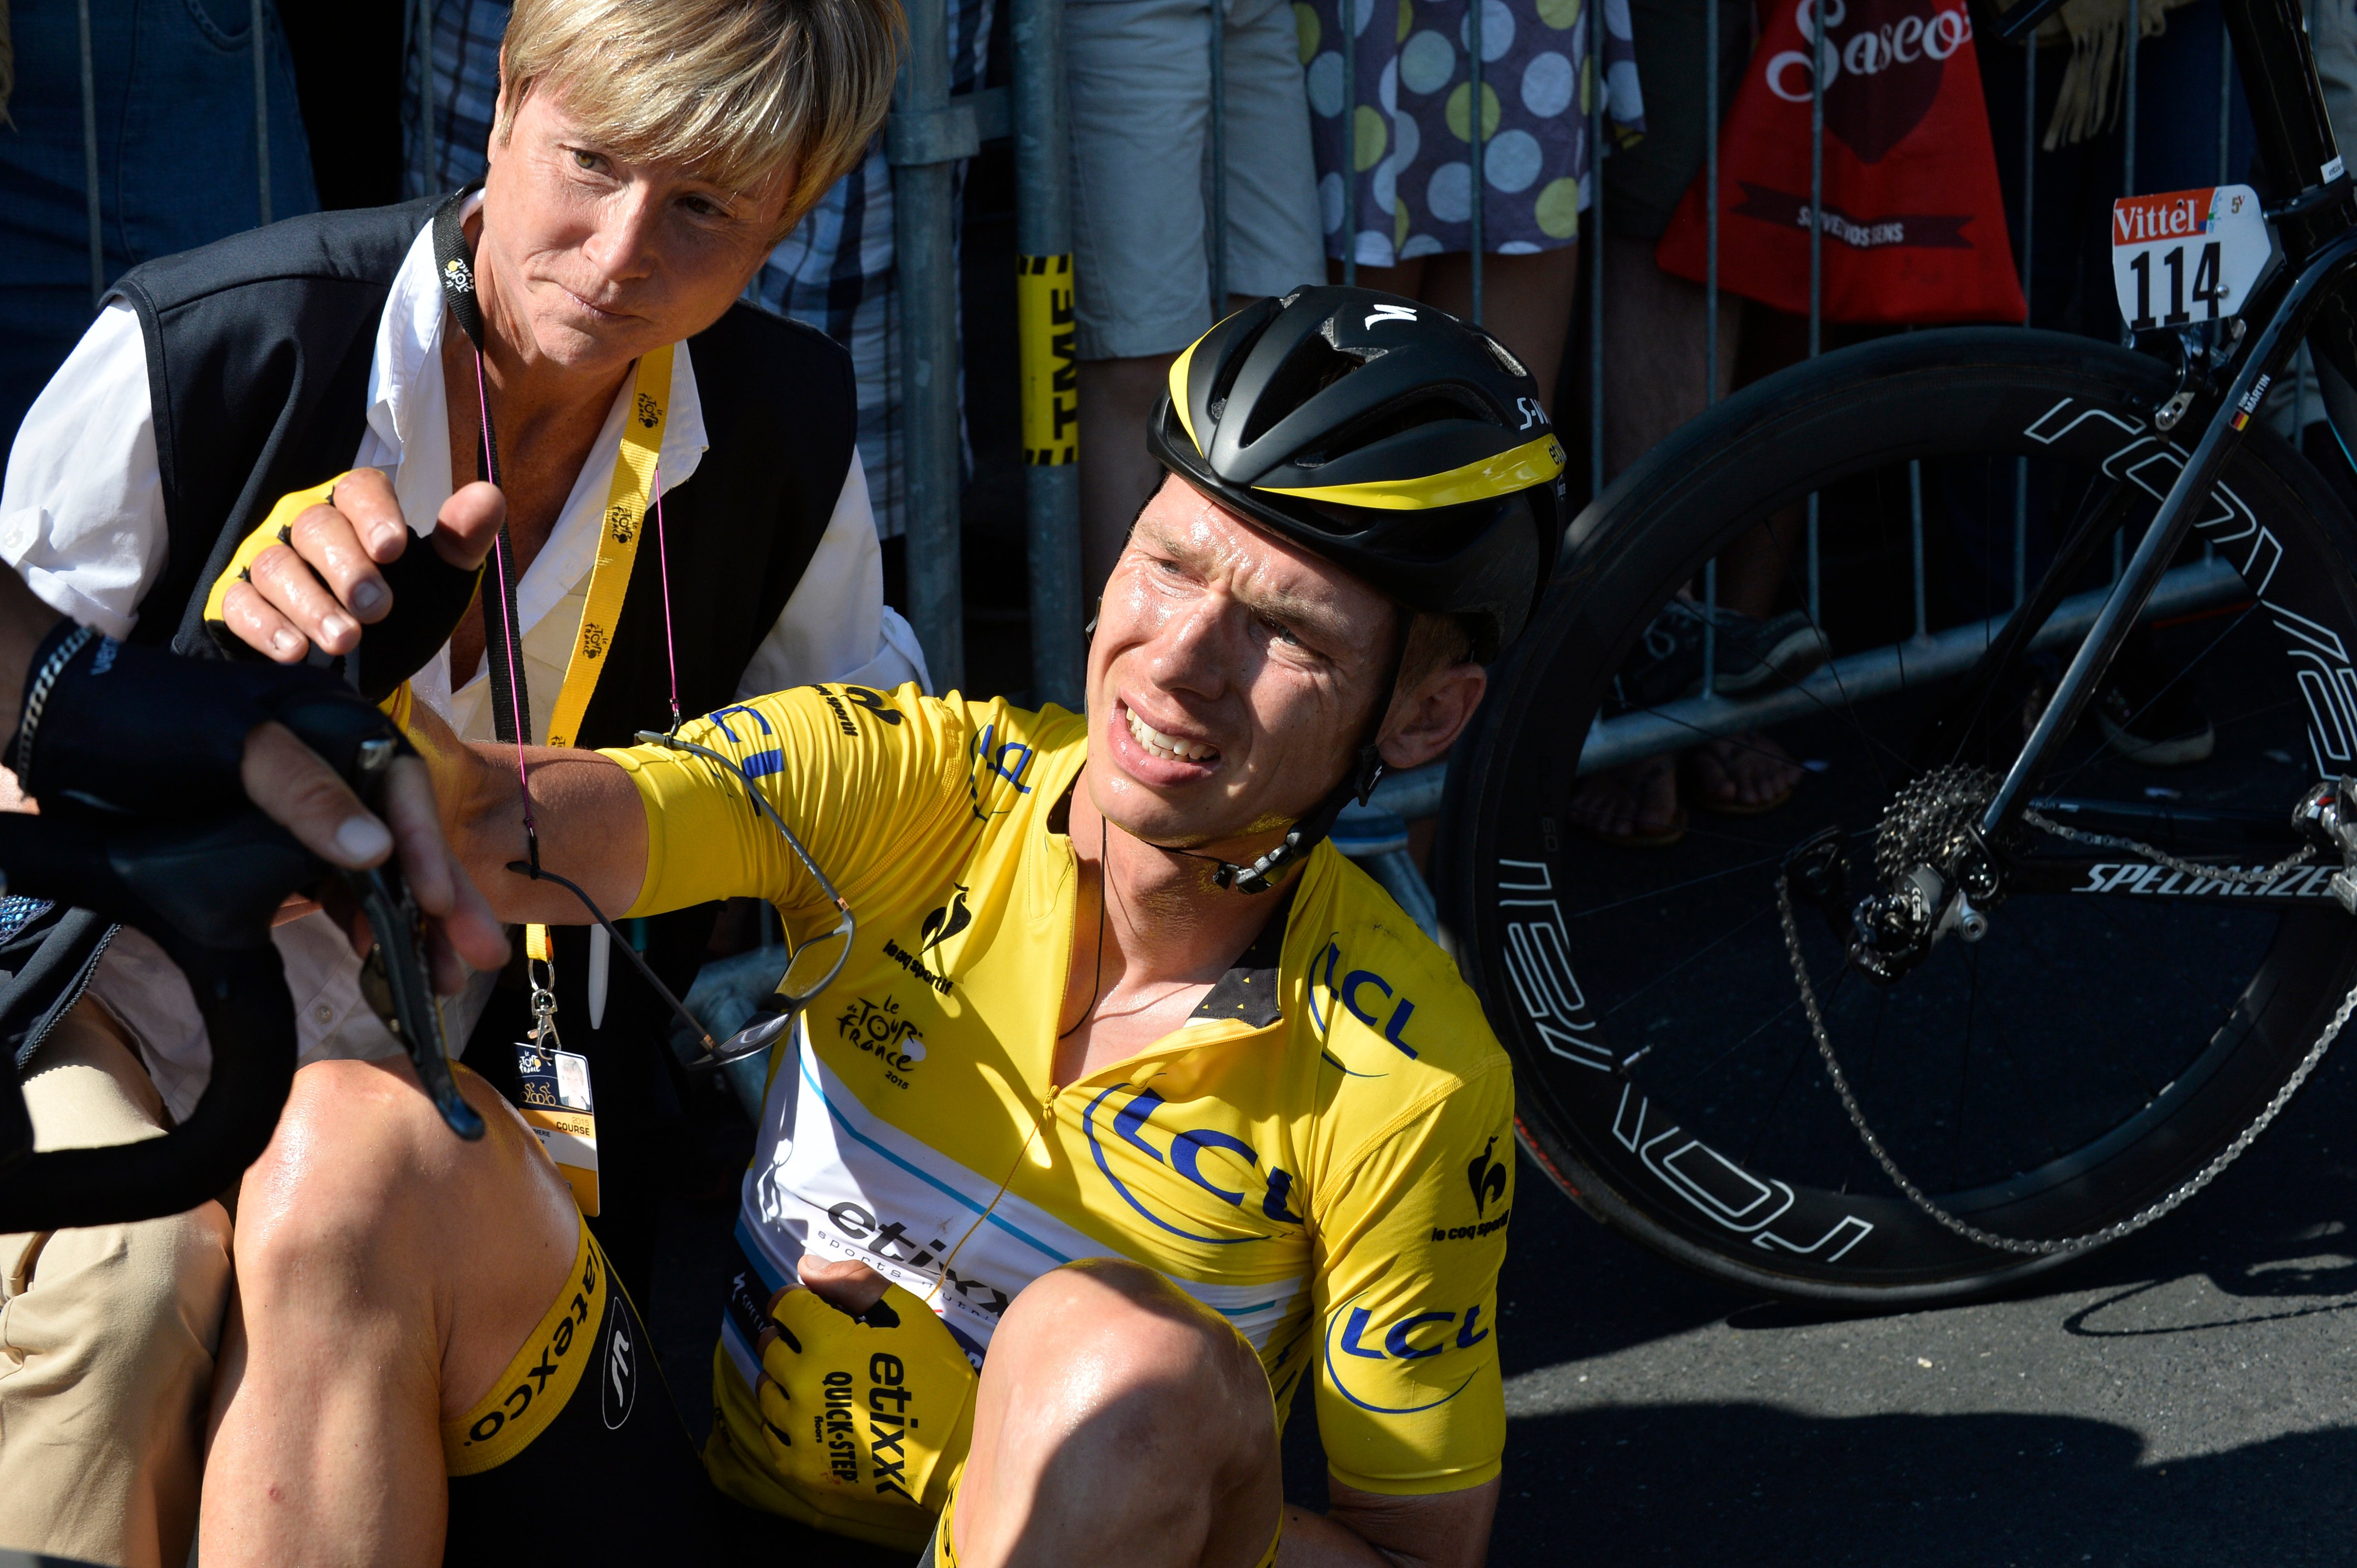 Germany's Tony Martin, wearing the overall leader's yellow jersey, lies on the road with a broken collar bone after crashing in the last kilometers of the sixth stage of the Tour de France cycling race over 191.5 kilometers (119 miles) with start in Abbeville and finish in Le Havre, France, July 9, 2015 (Stephane Mantey—AP)